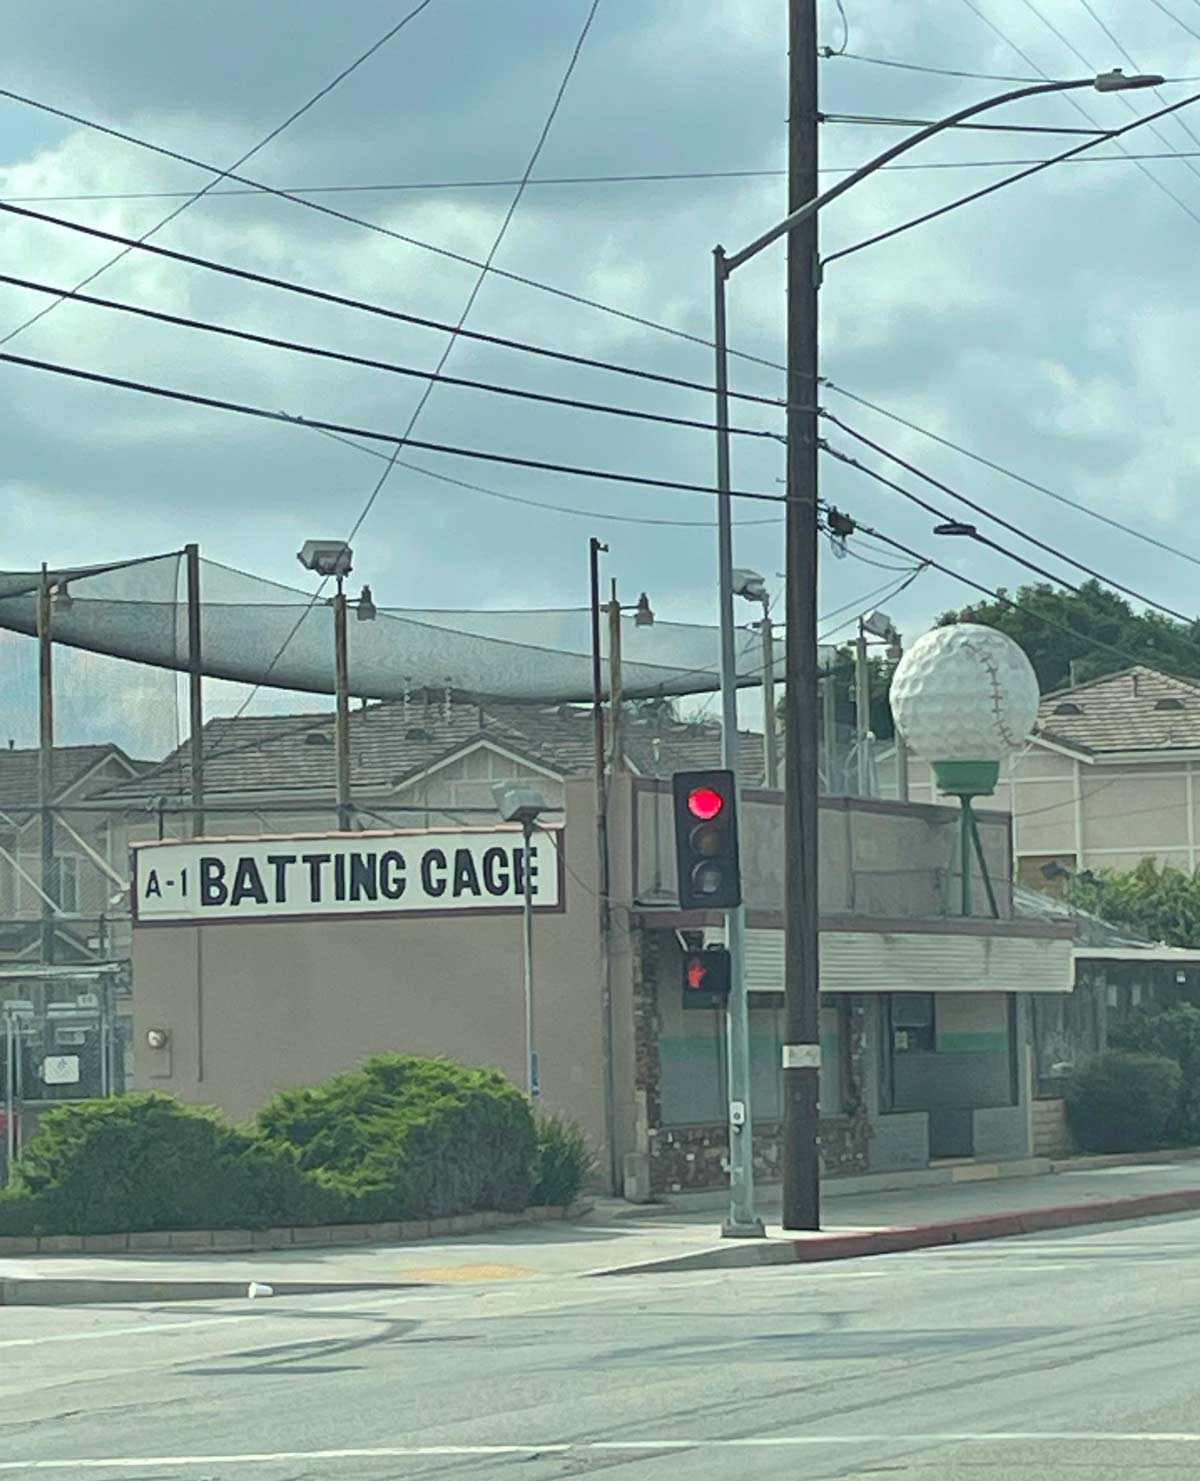 These batting cages used to be a driving range. Instead of replacing the golf ball they just added stitches to it instead